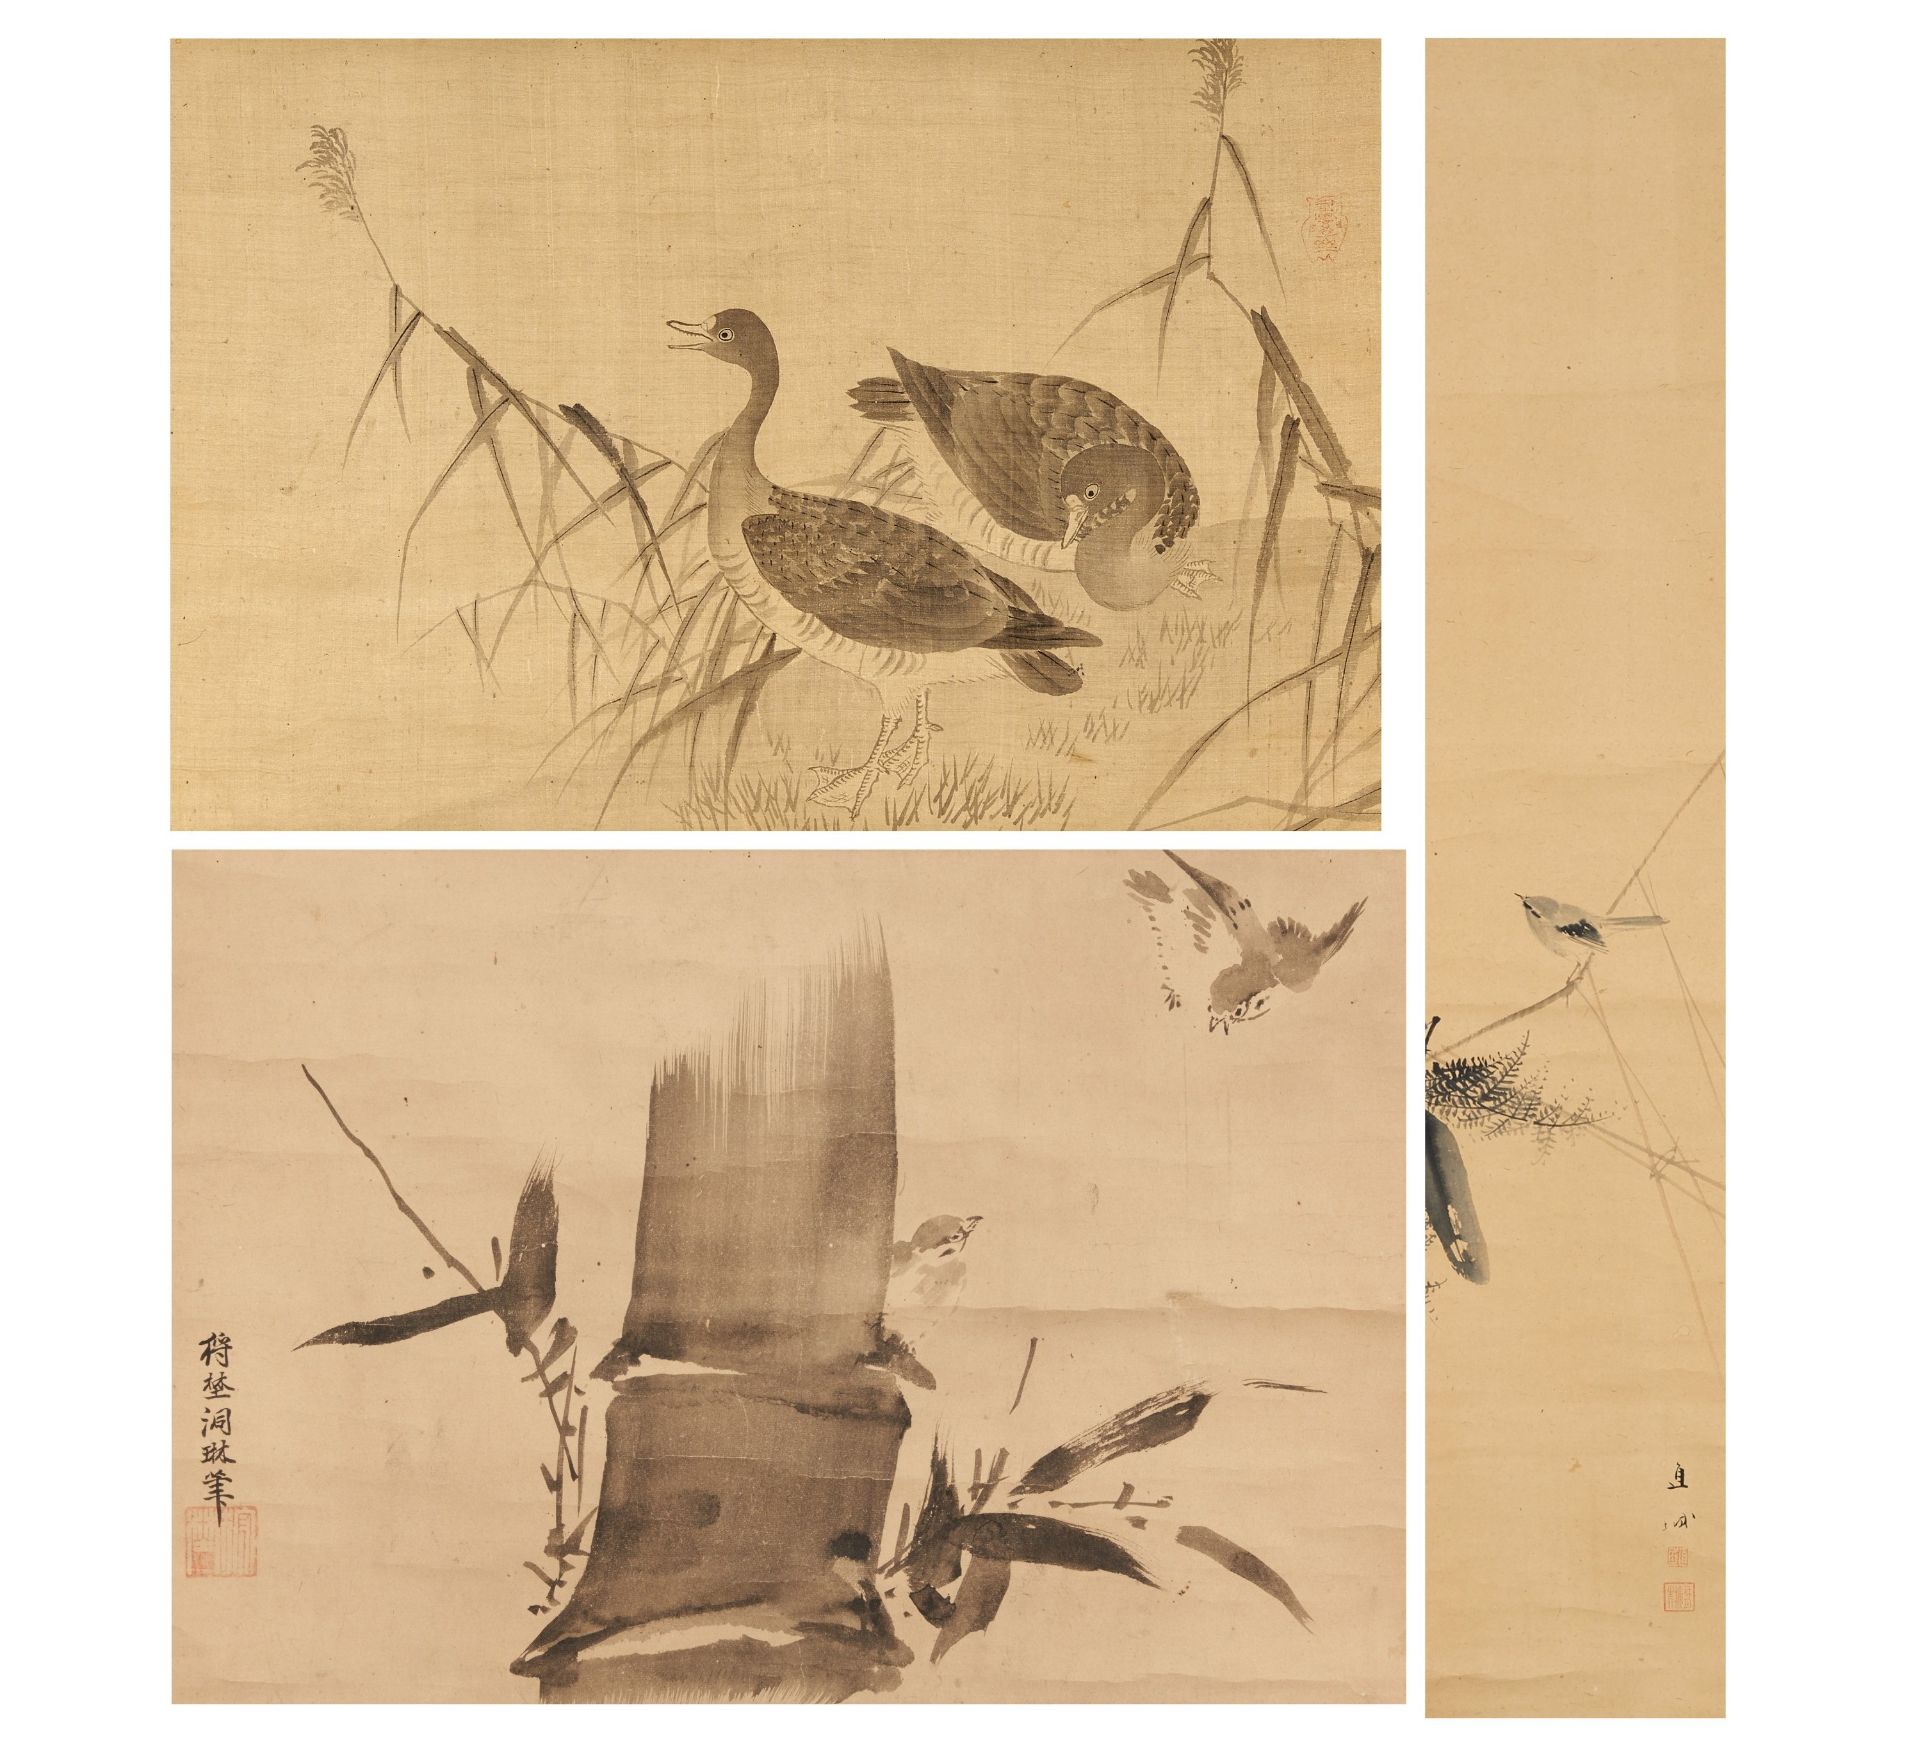 THREE HANGING PICTURES WITH BIRDS. Japan. 19th c. Ink on silk/paper. Mounted as hanging scroll.